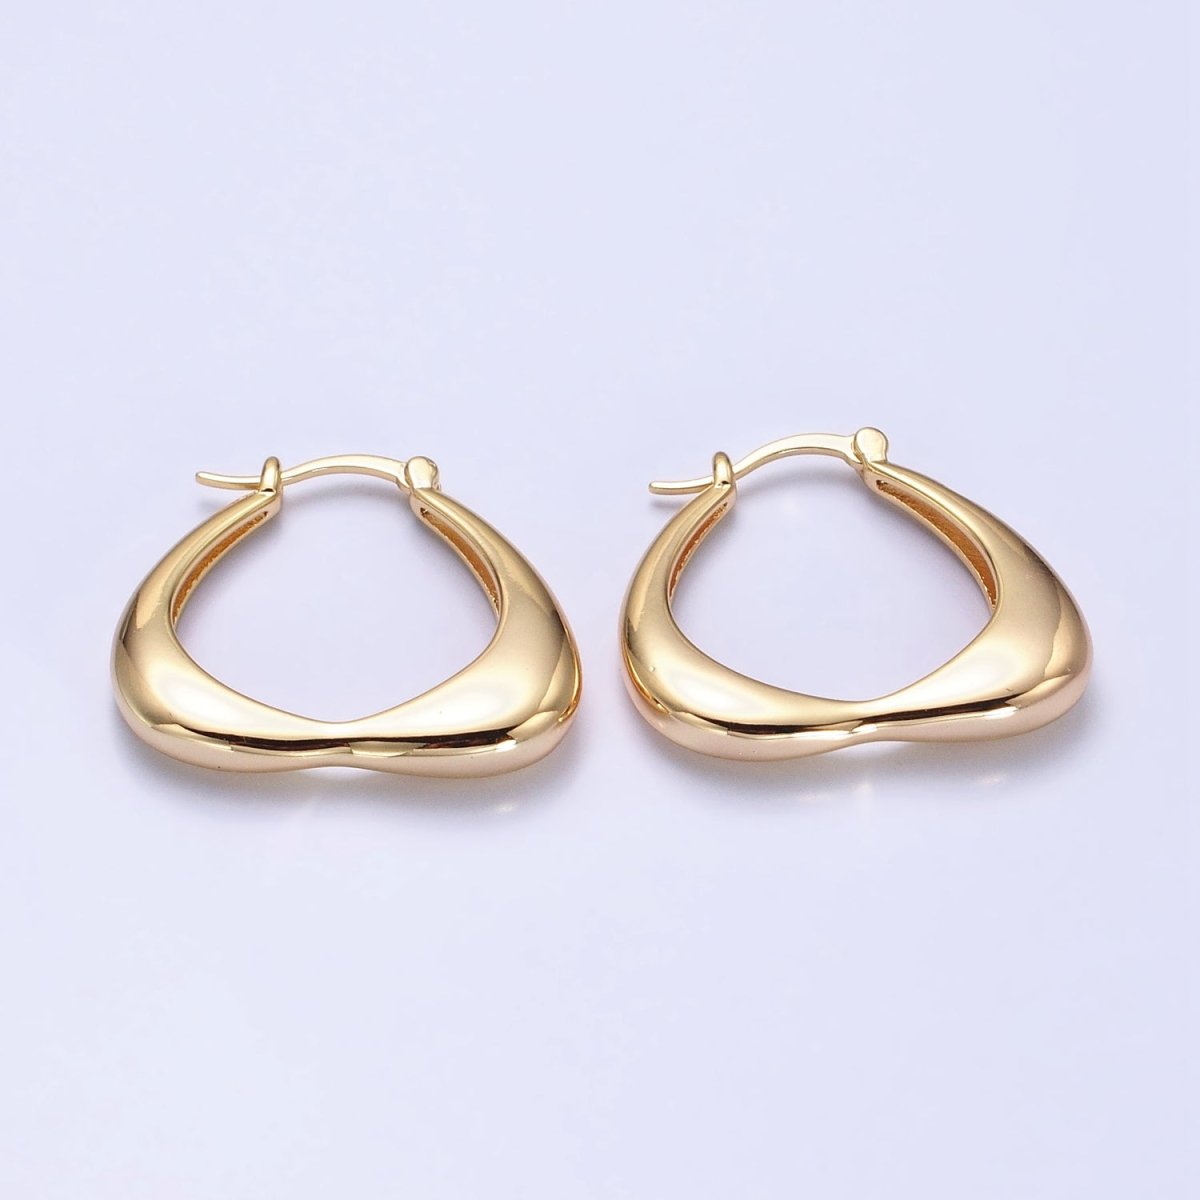 Gold, Silver Geometric Abstract Triangle Statement Latch Earrings | AB543 AB544 - DLUXCA